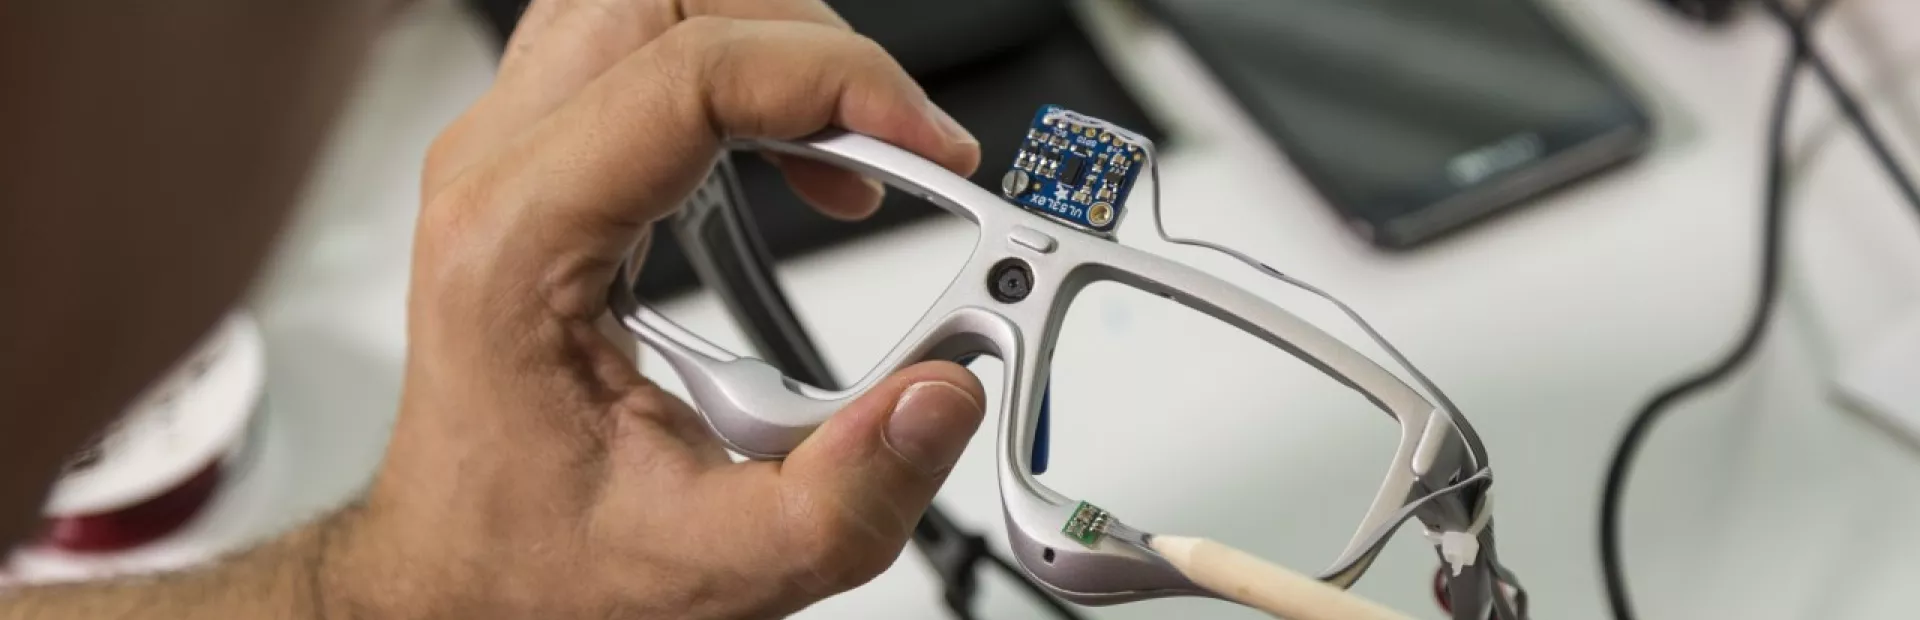 The smart glasses developed by Roman Schmied and Vanessa Leung